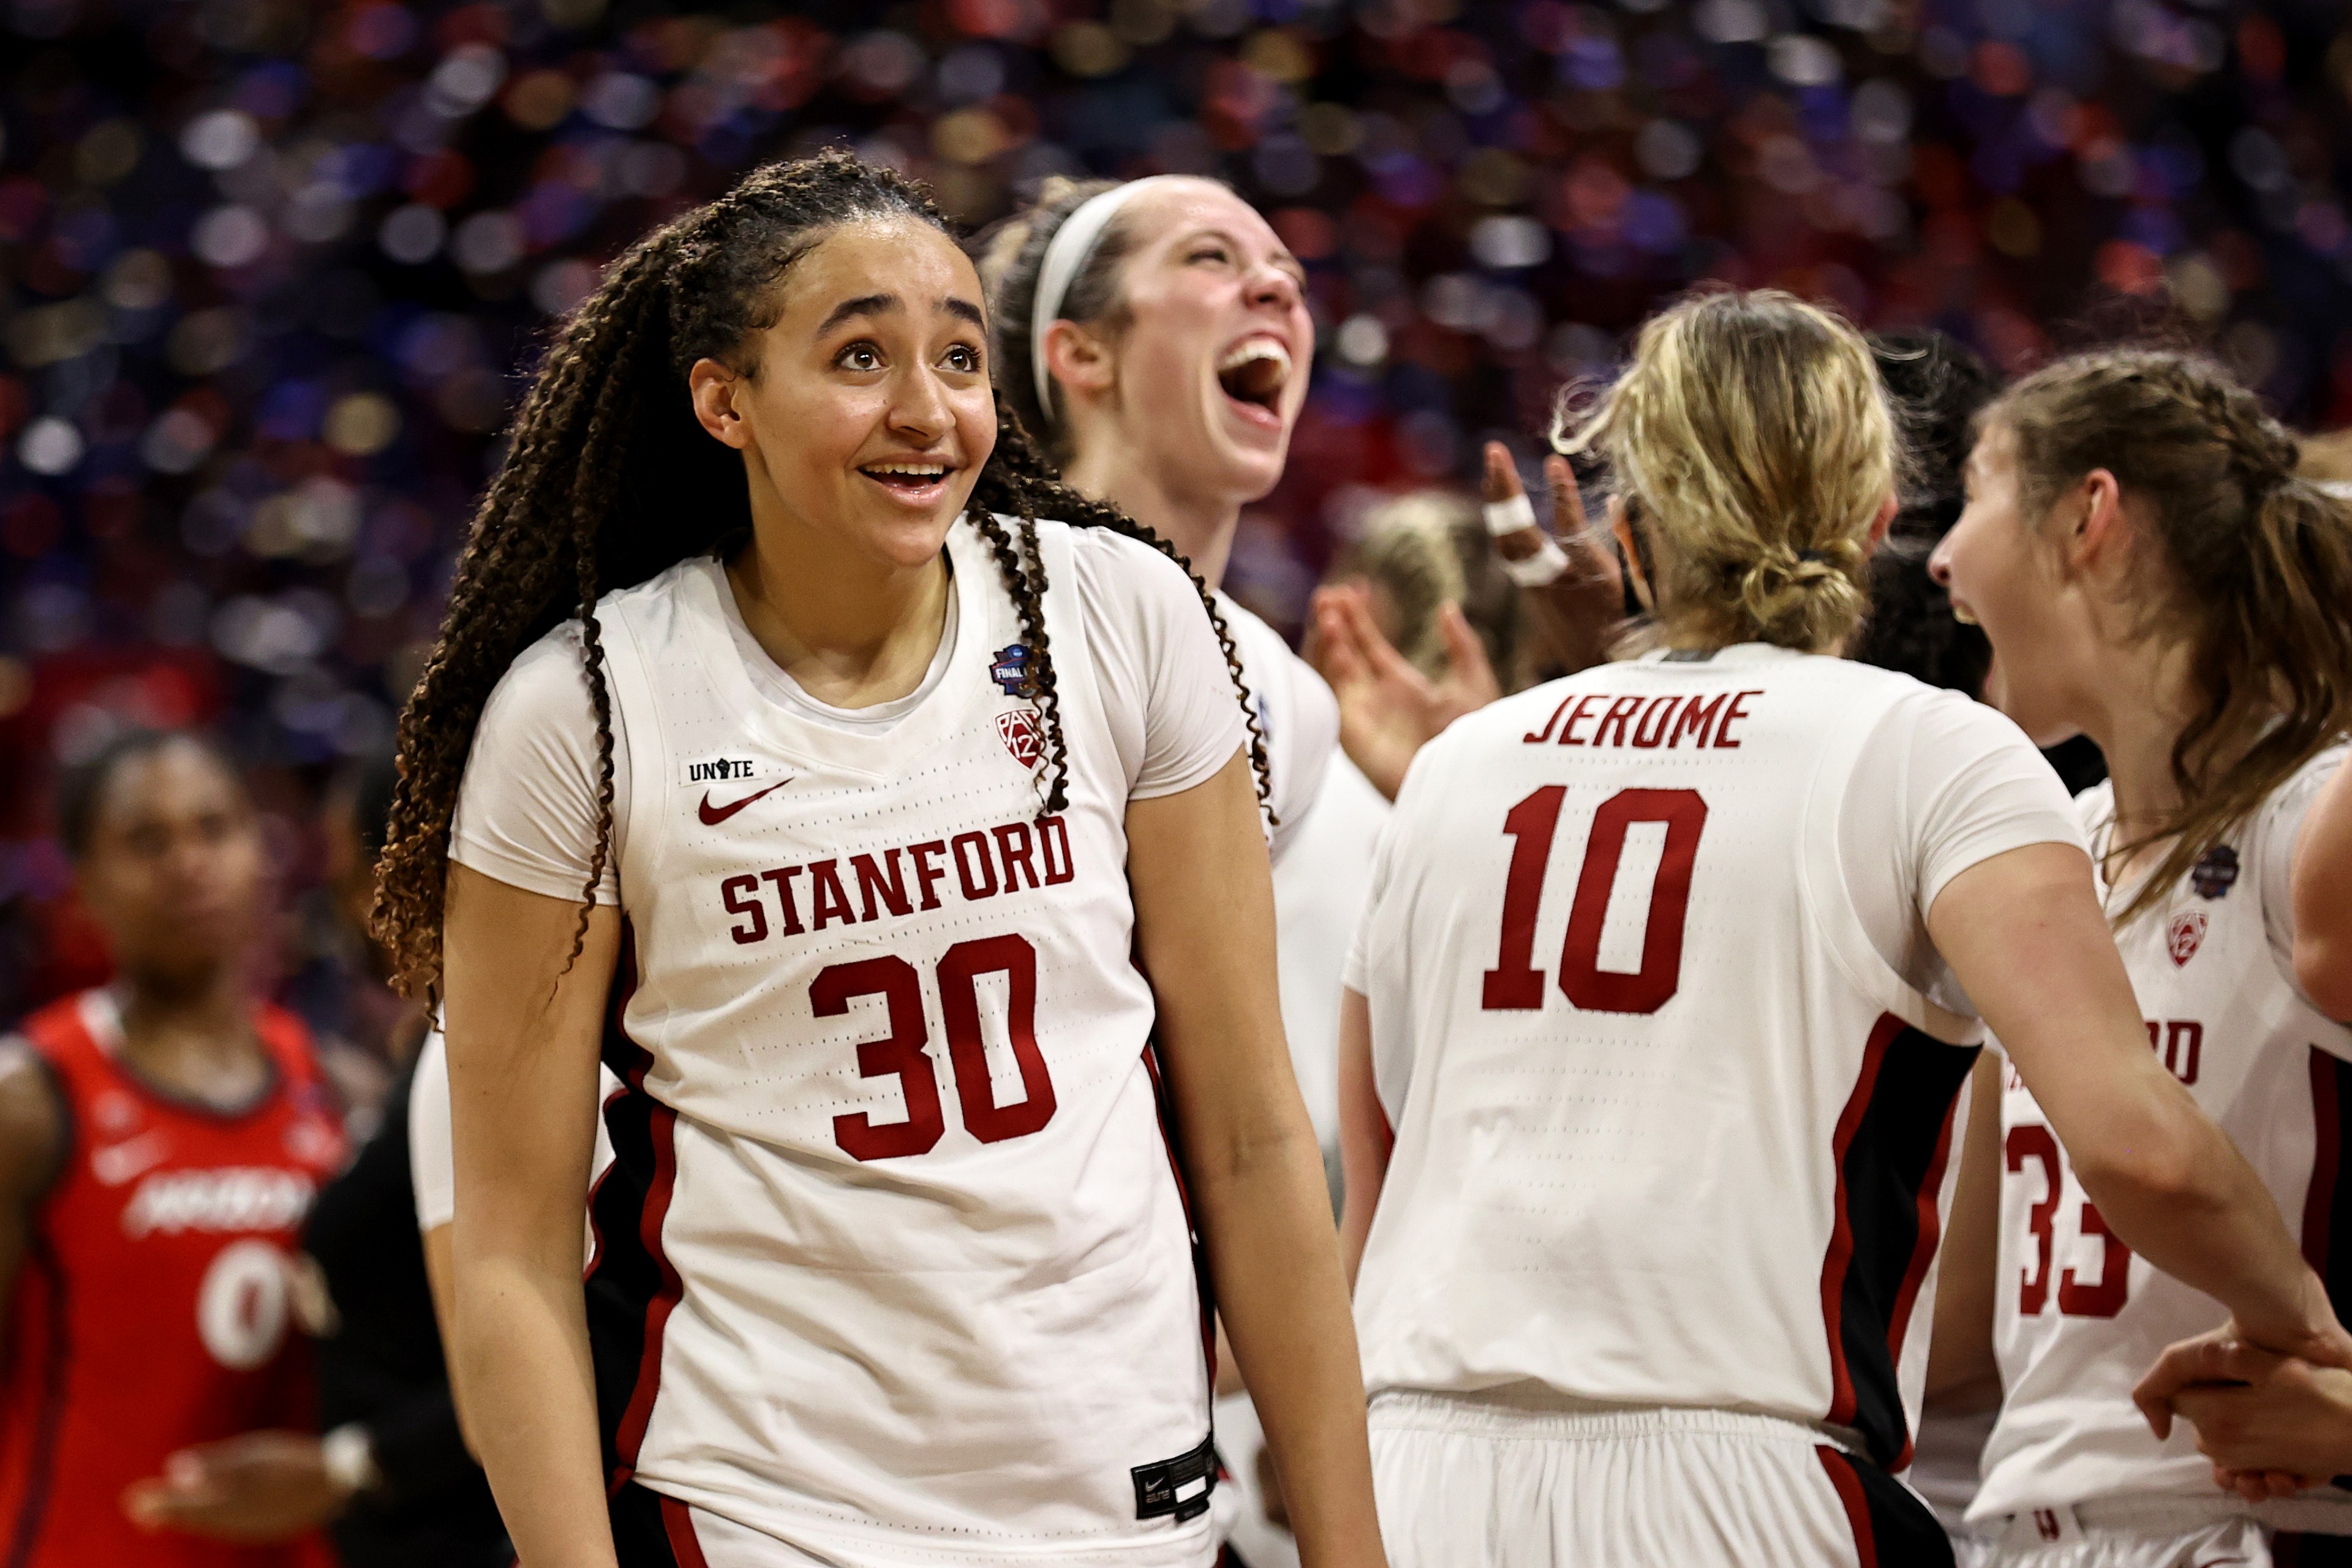 Haley Jones #30 of the Stanford Cardinal celebrates a team win against the Arizona Wildcats in the National Championship game of the 2021 NCAA Women's Basketball Tournament at the Alamodome on April 04, 2021 in San Antonio, Texas.